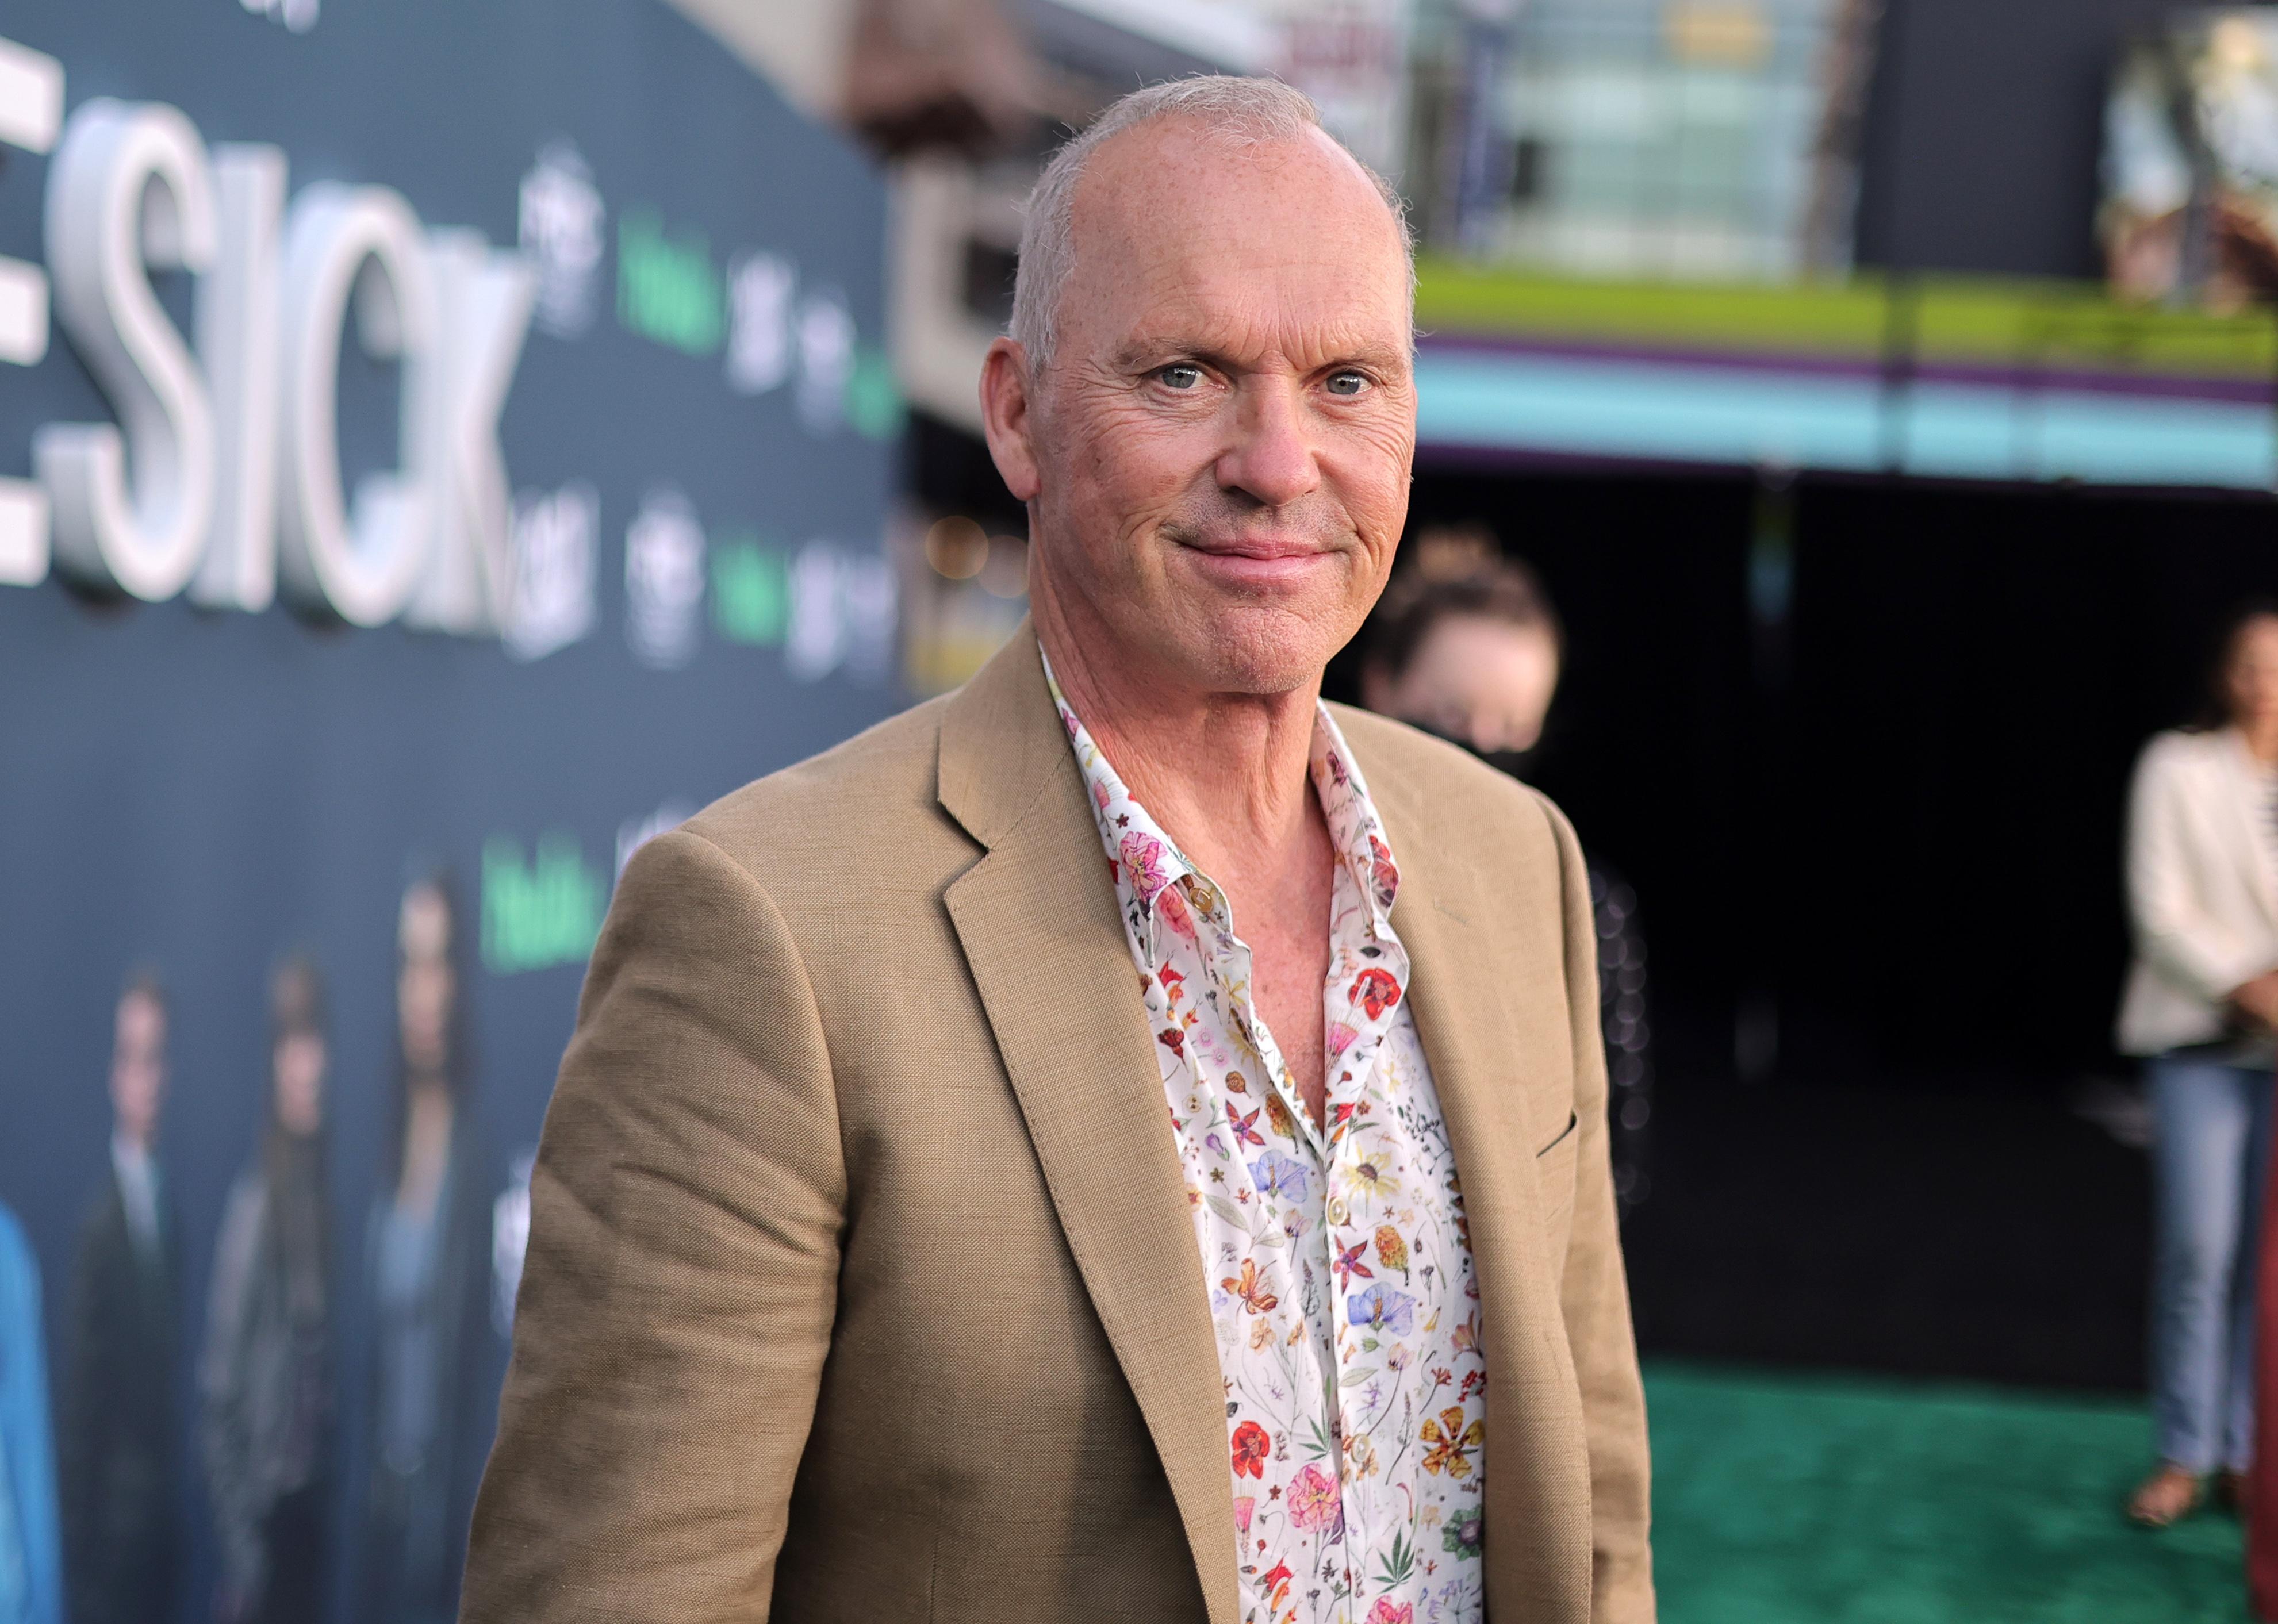 Michael Keaton attends the special screening and Q&A event for Hulu